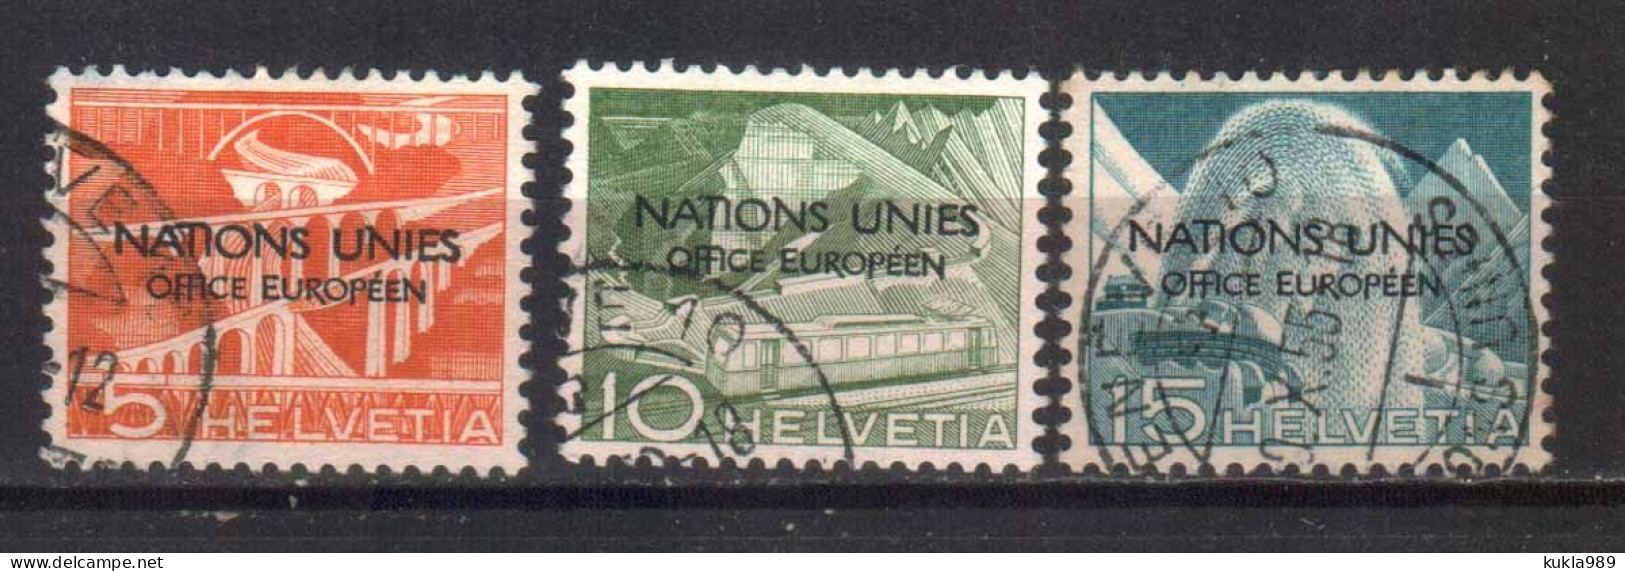 SWITZERLAND STAMPS, 1950 UN EUROPEAN OFFICE. Sc.#7O1-7O3. USED - Used Stamps